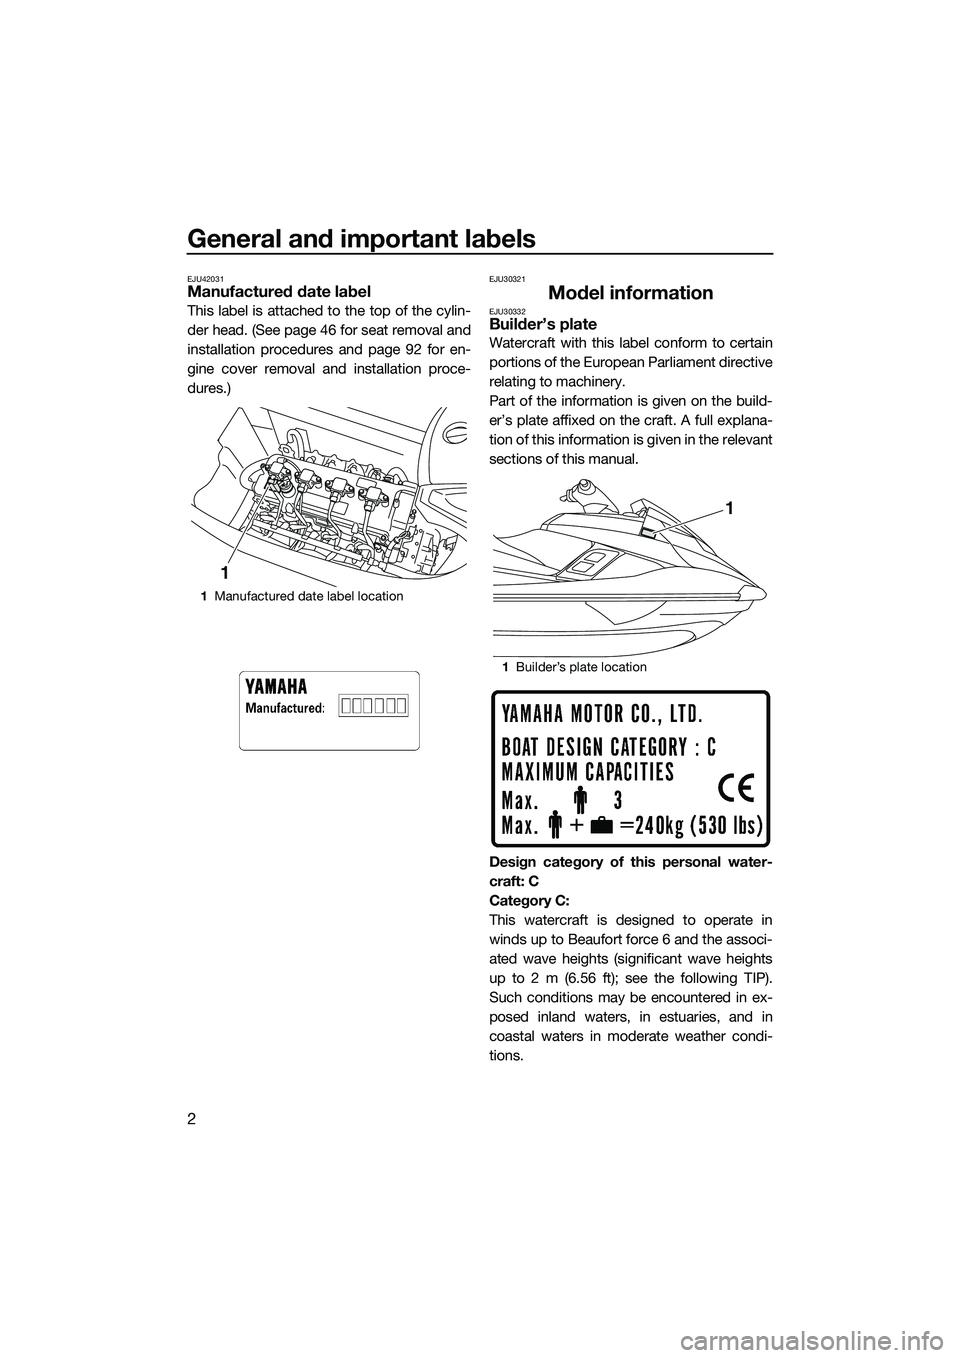 YAMAHA FX HO CRUISER 2014  Owners Manual General and important labels
2
EJU42031Manufactured date label
This label is attached to the top of the cylin-
der head. (See page 46 for seat removal and
installation procedures and page 92 for en-
g